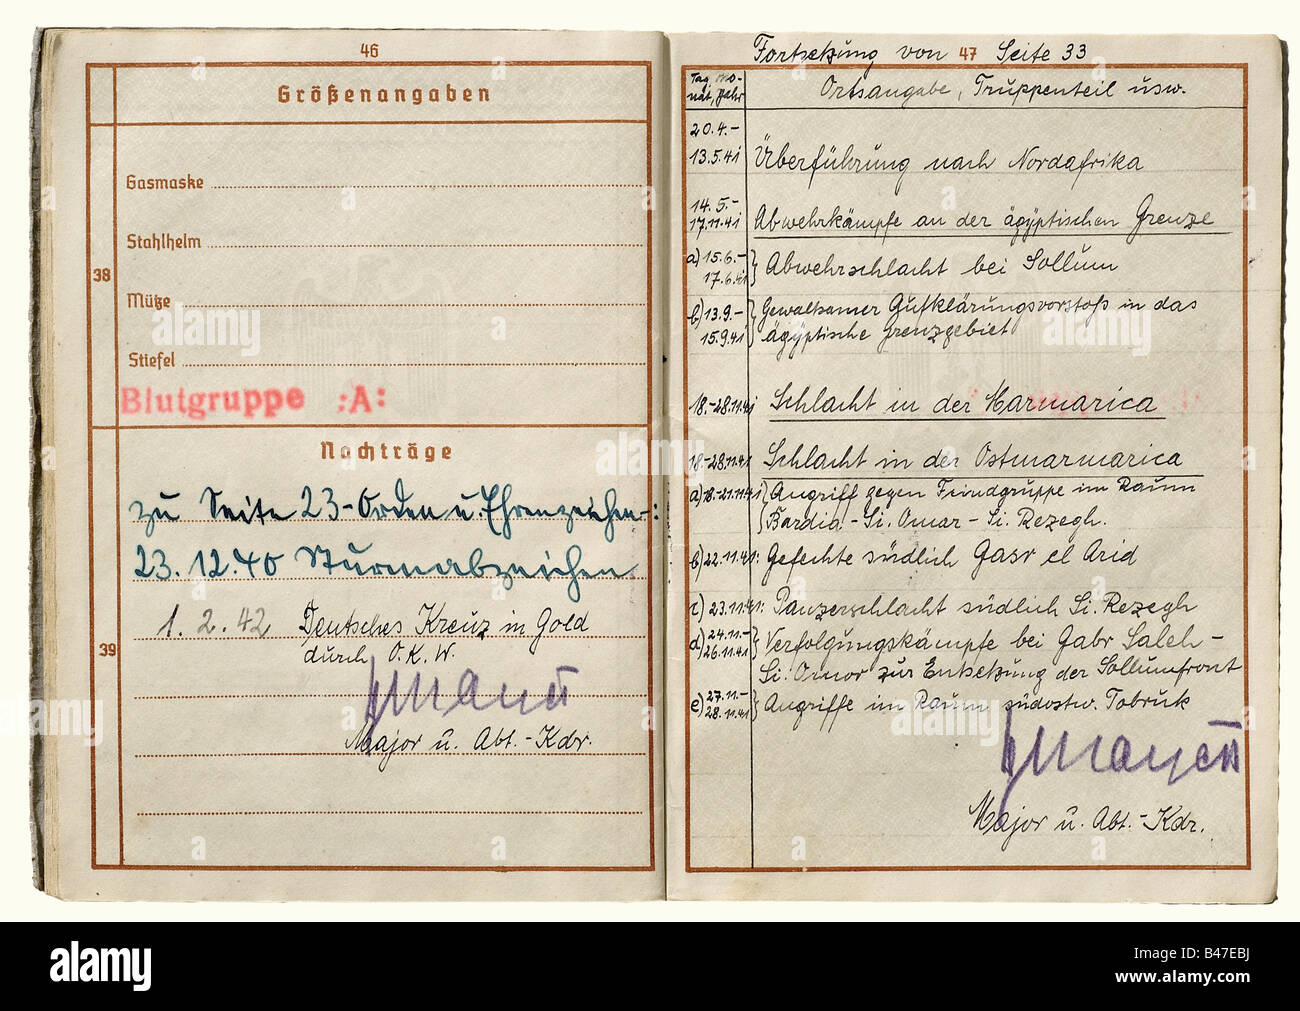 A pay book for Oberleutnant (First Lieutenant) Ernst Eckhart Wild., Issued by the 33rd Artillery Regiment (AR). Photo in Luftwaffe uniform. Many entries: 33rd AR, combat entries for France and Africa. Wounded by an anti-tank gun in Africa, and taken prisoner by the English at a medical clearing station, he died in hospital. Wound Badge in Black. Iron Cross 1st and 2nd. Assault Badge. Defensive Wall Medal, German Cross in Gold. historic, historical, 1930s, 20th century, passport, passports, document, documents, military, militaria, NS, National Socialism, Nazism, Stock Photo